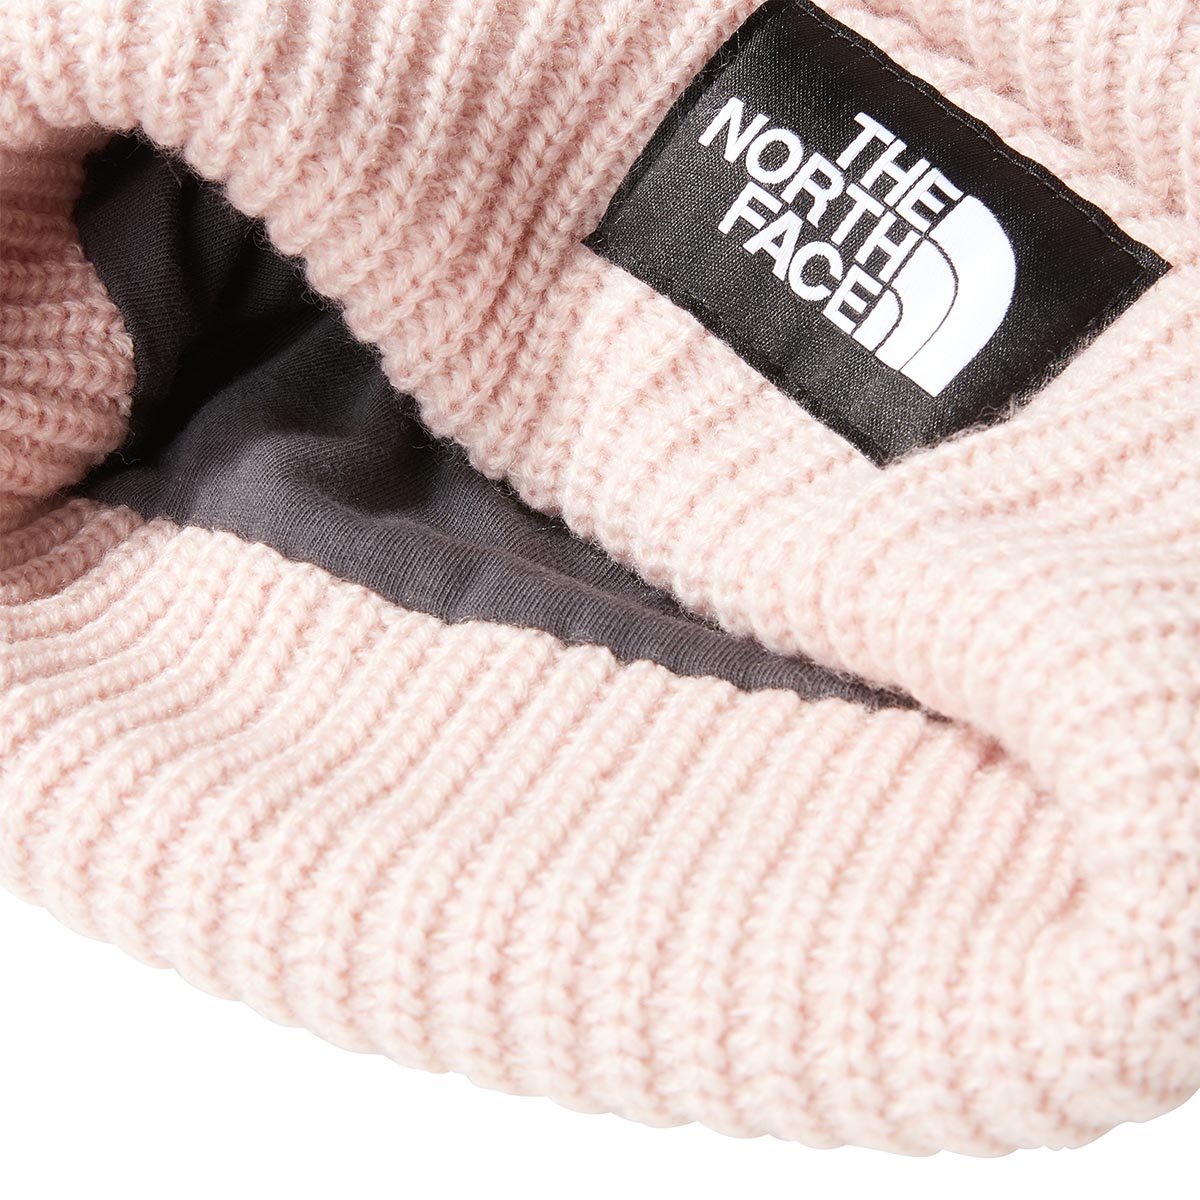 THE NORTH FACE - KIDS' SALTY DOG BEANIE